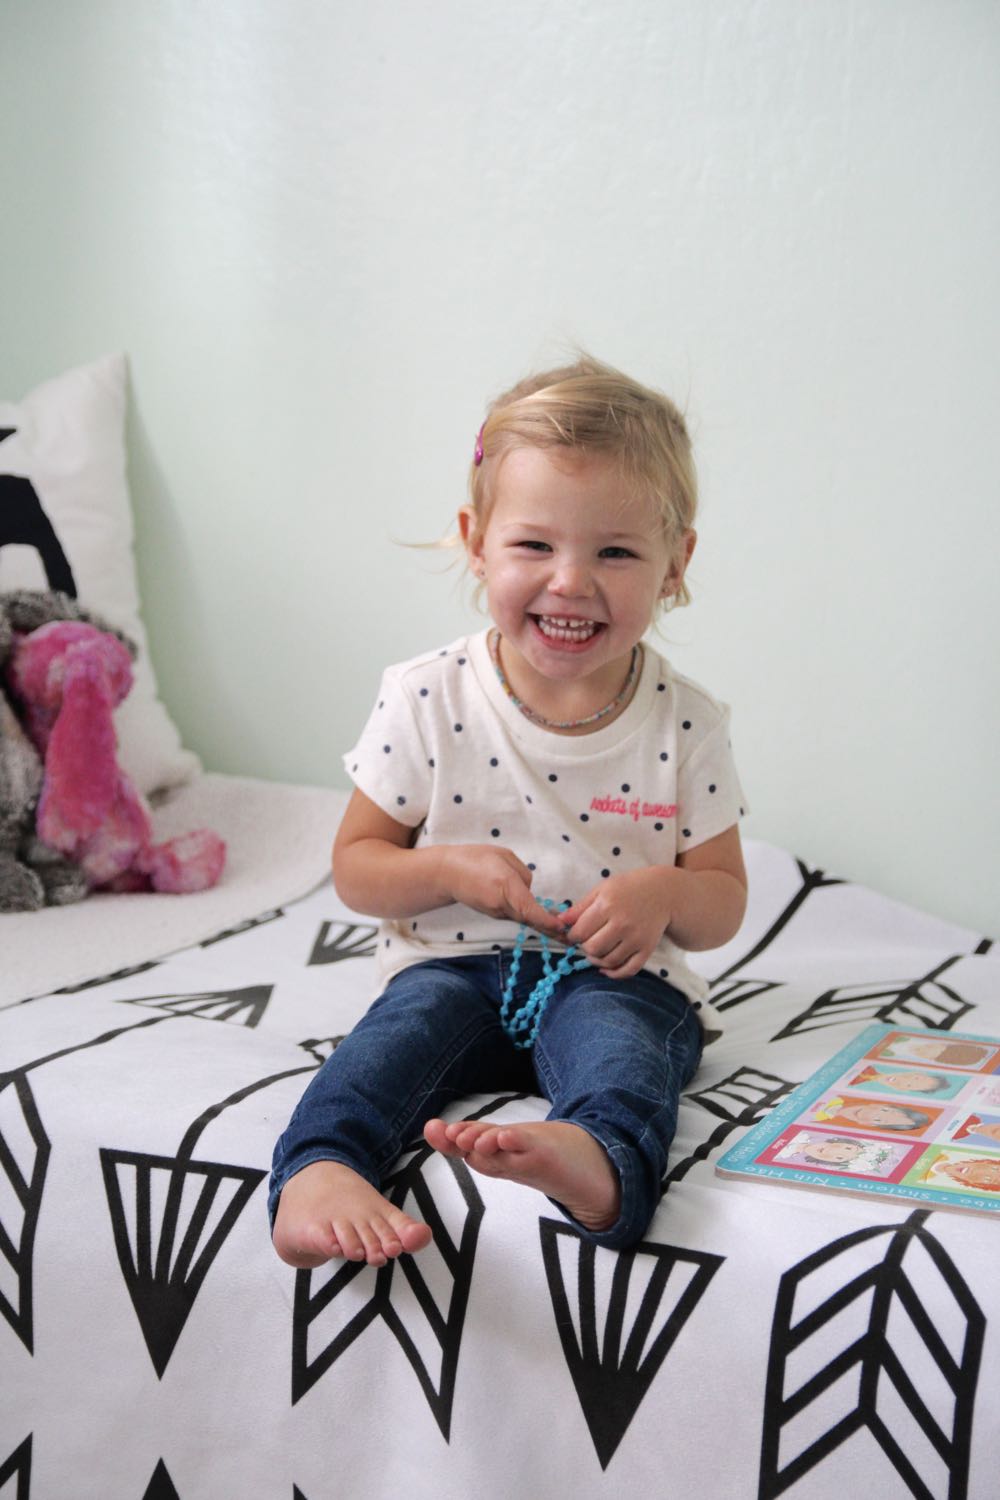 Rockets Of Awesome children's clothing subscription service